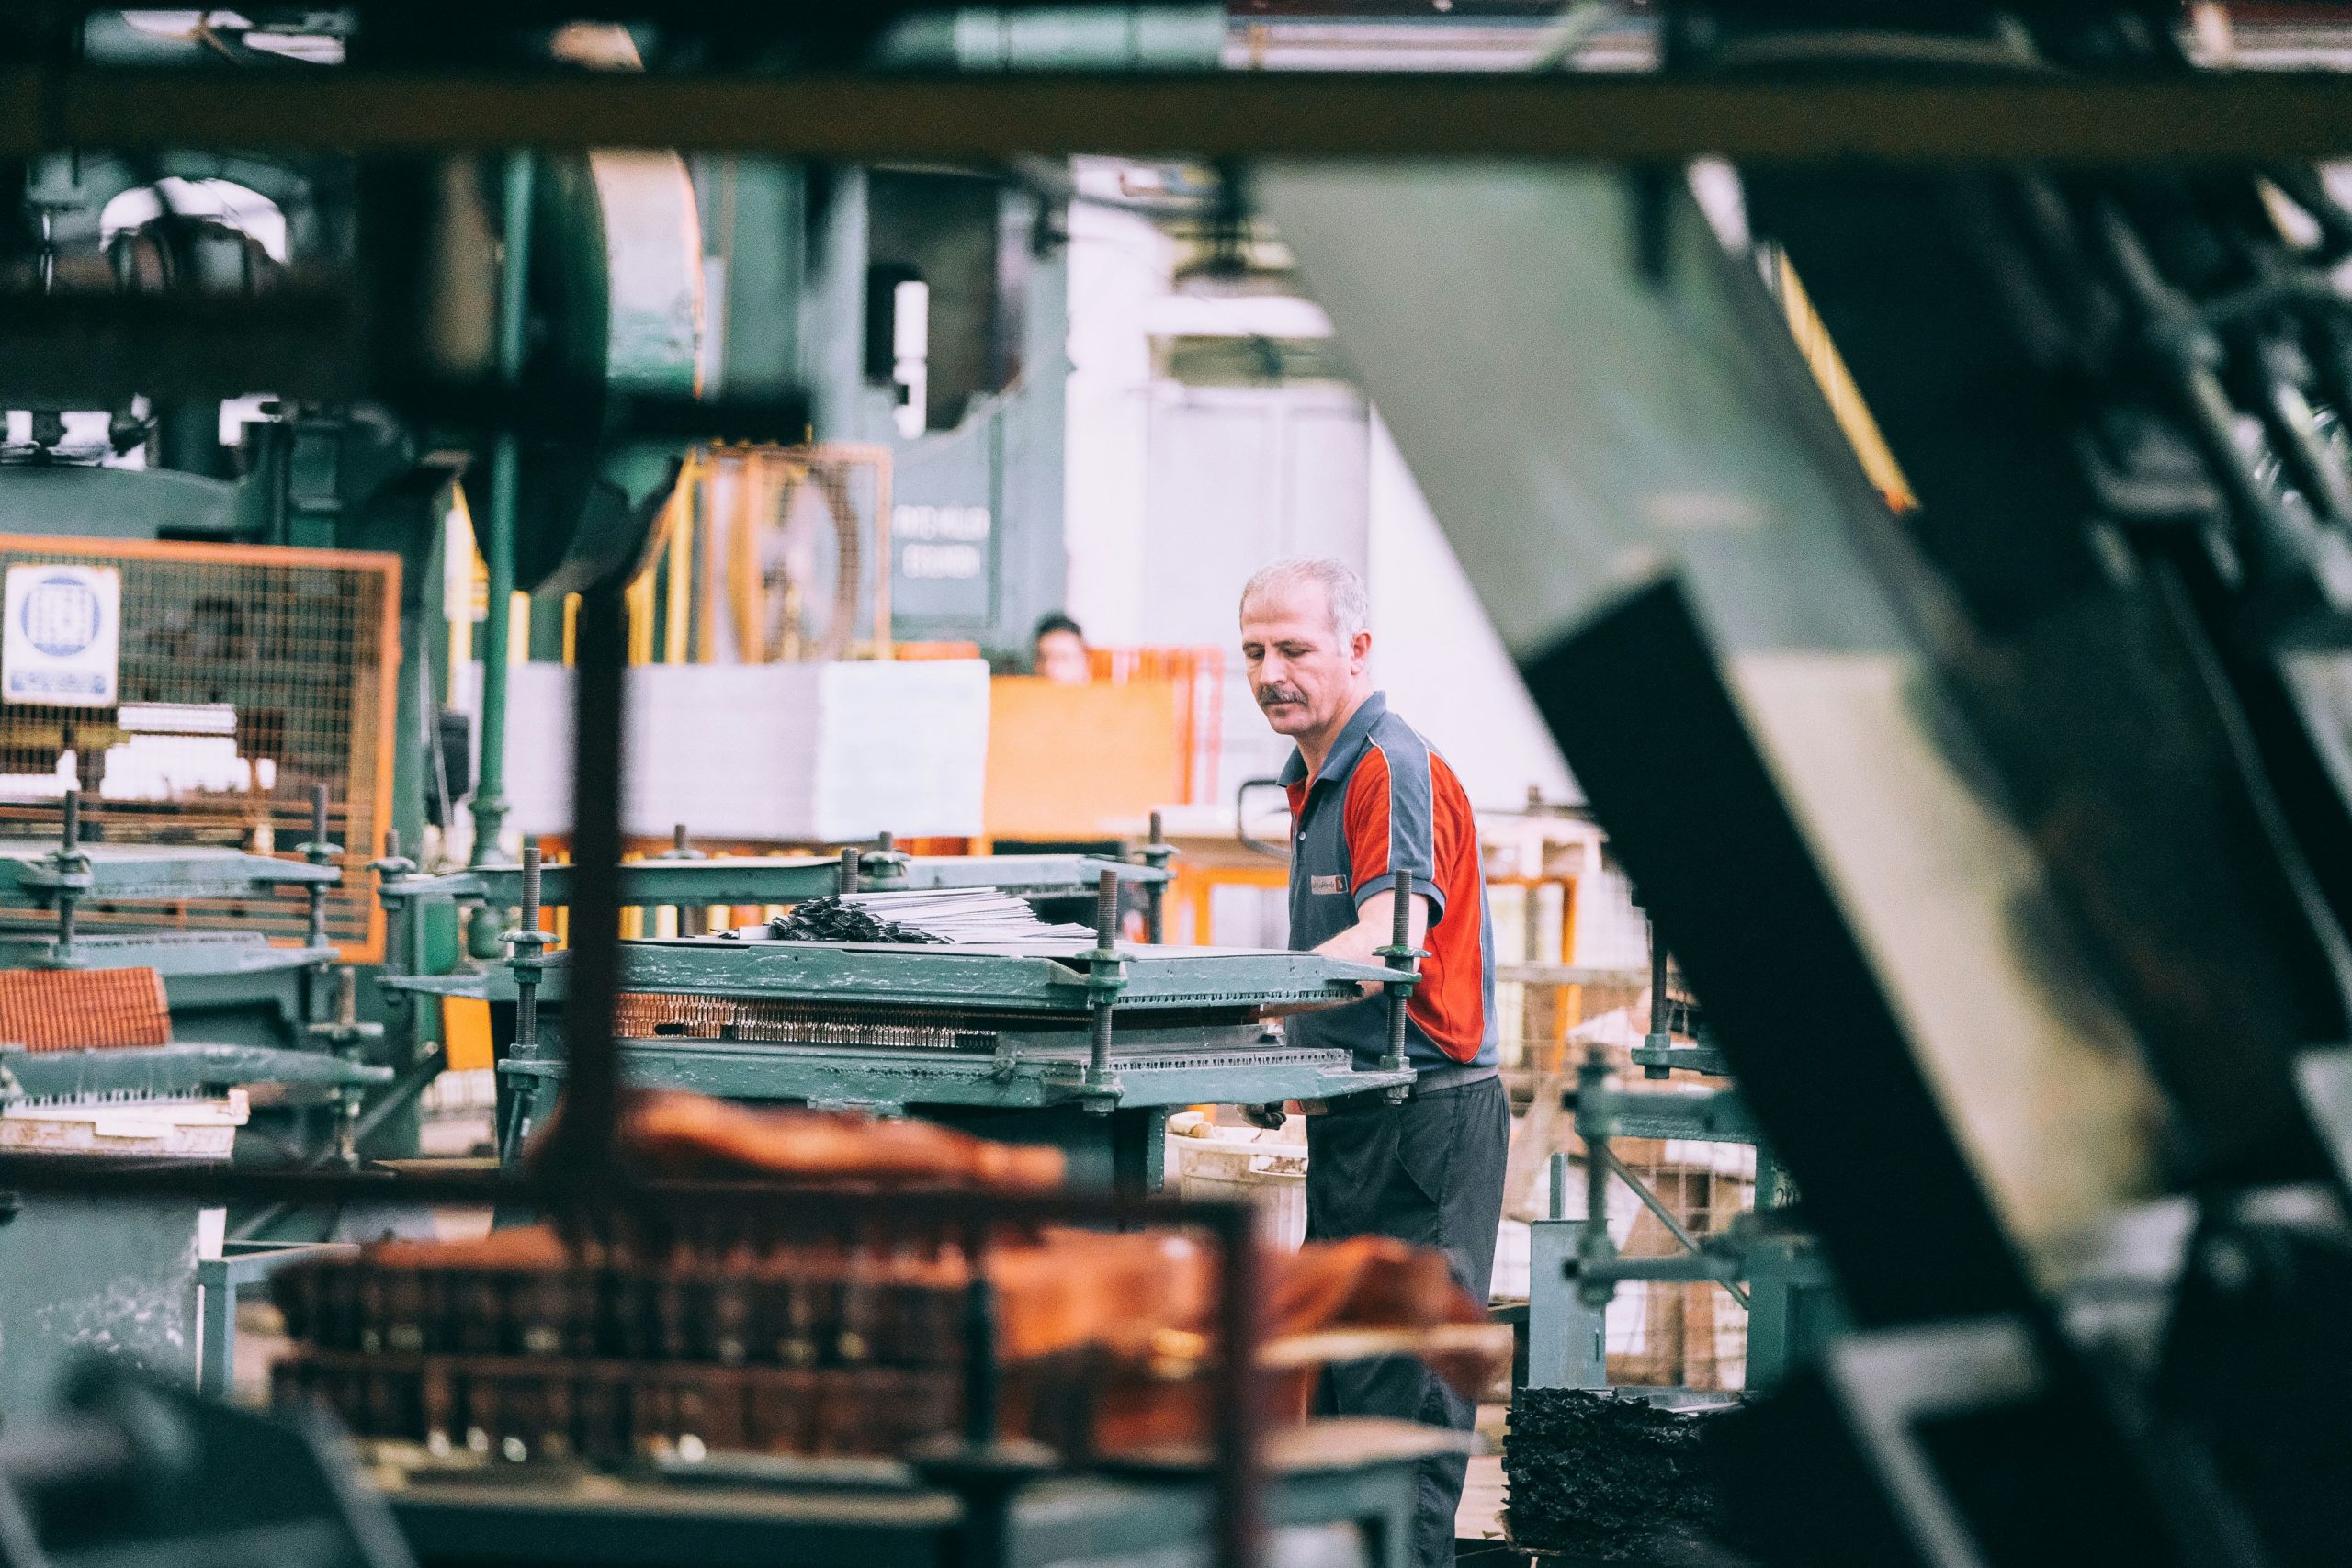 Print on Demand vs. Traditional Manufacturing: Which is Right for Your Business?